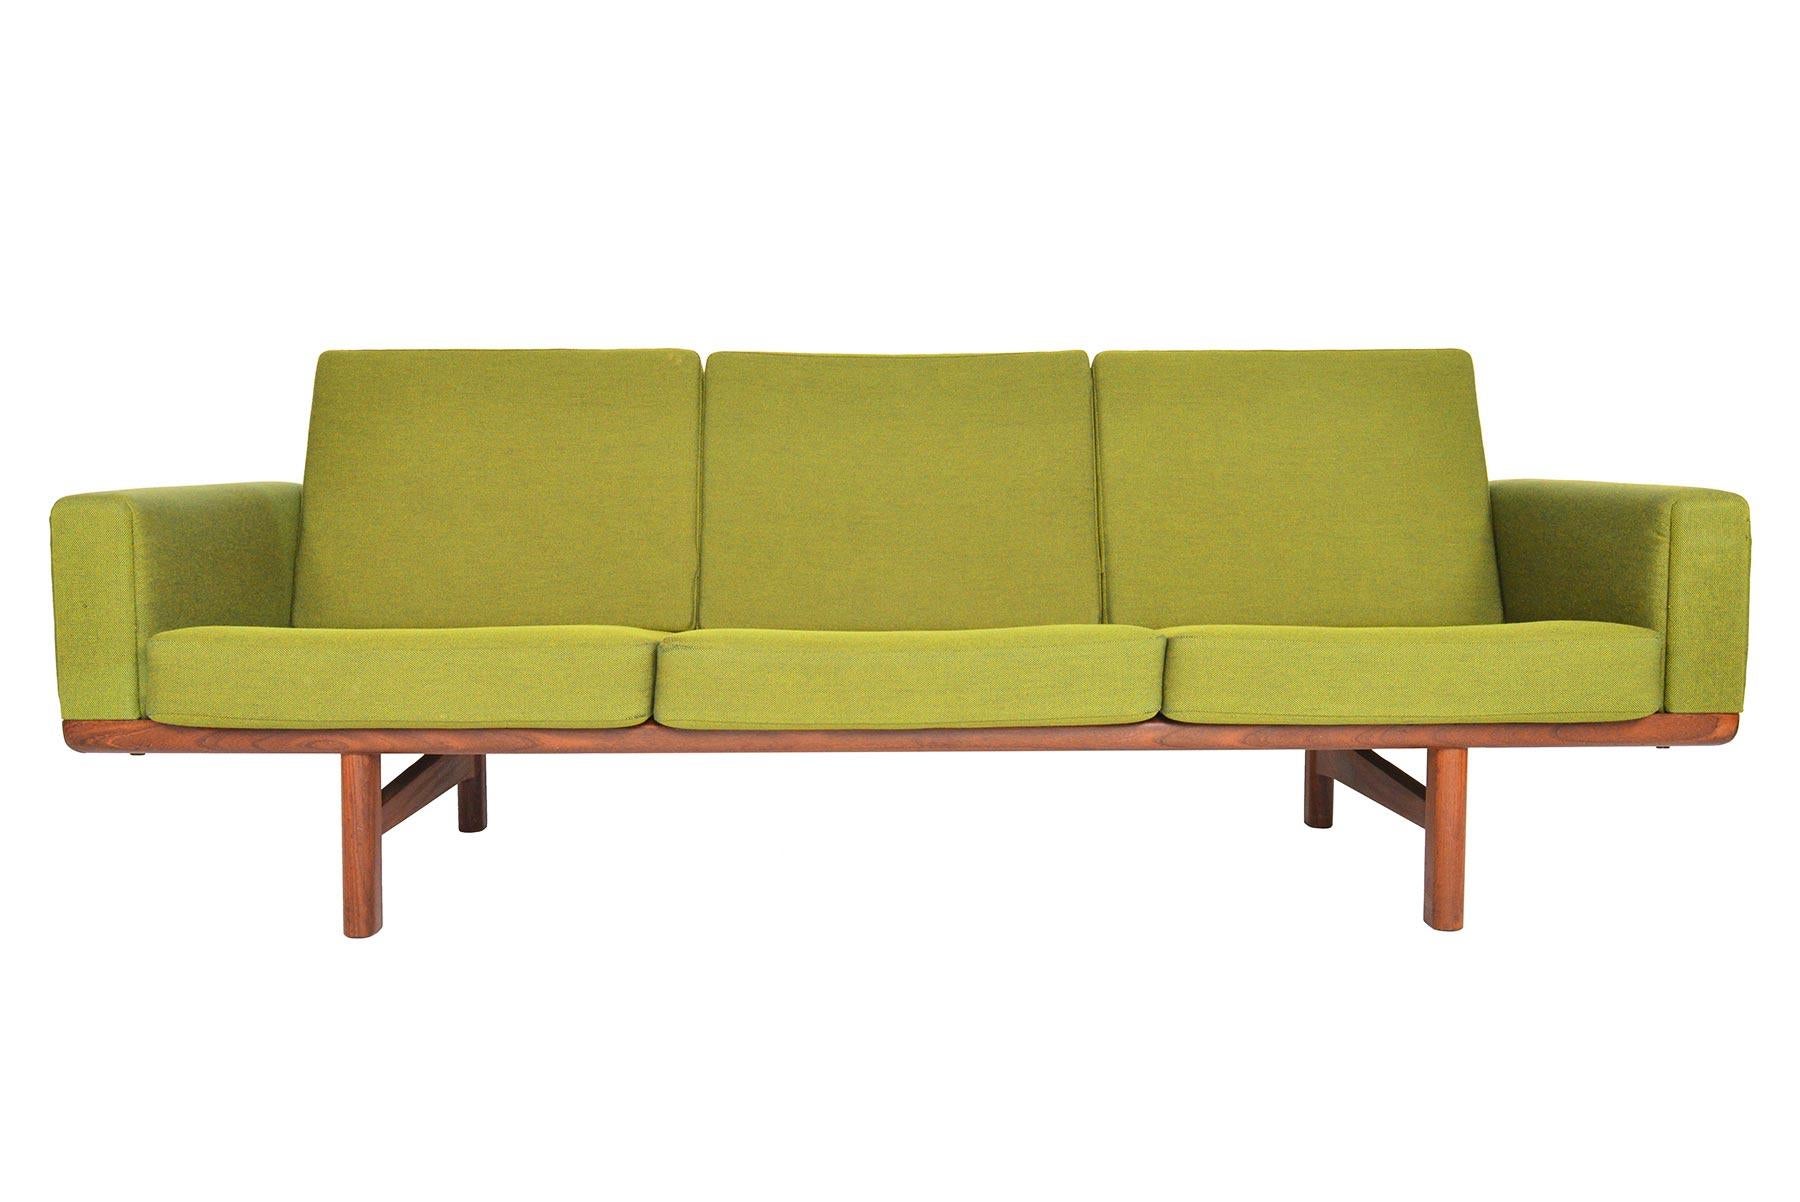 This Danish modern three-seat sofa in walnut was designed by Hans Wegner as model GE- 236-3 for GETAMA in the 1950s. This excellently preserved piece showcases a sculptural back while providing upholstered arms and six original sprung cushions.